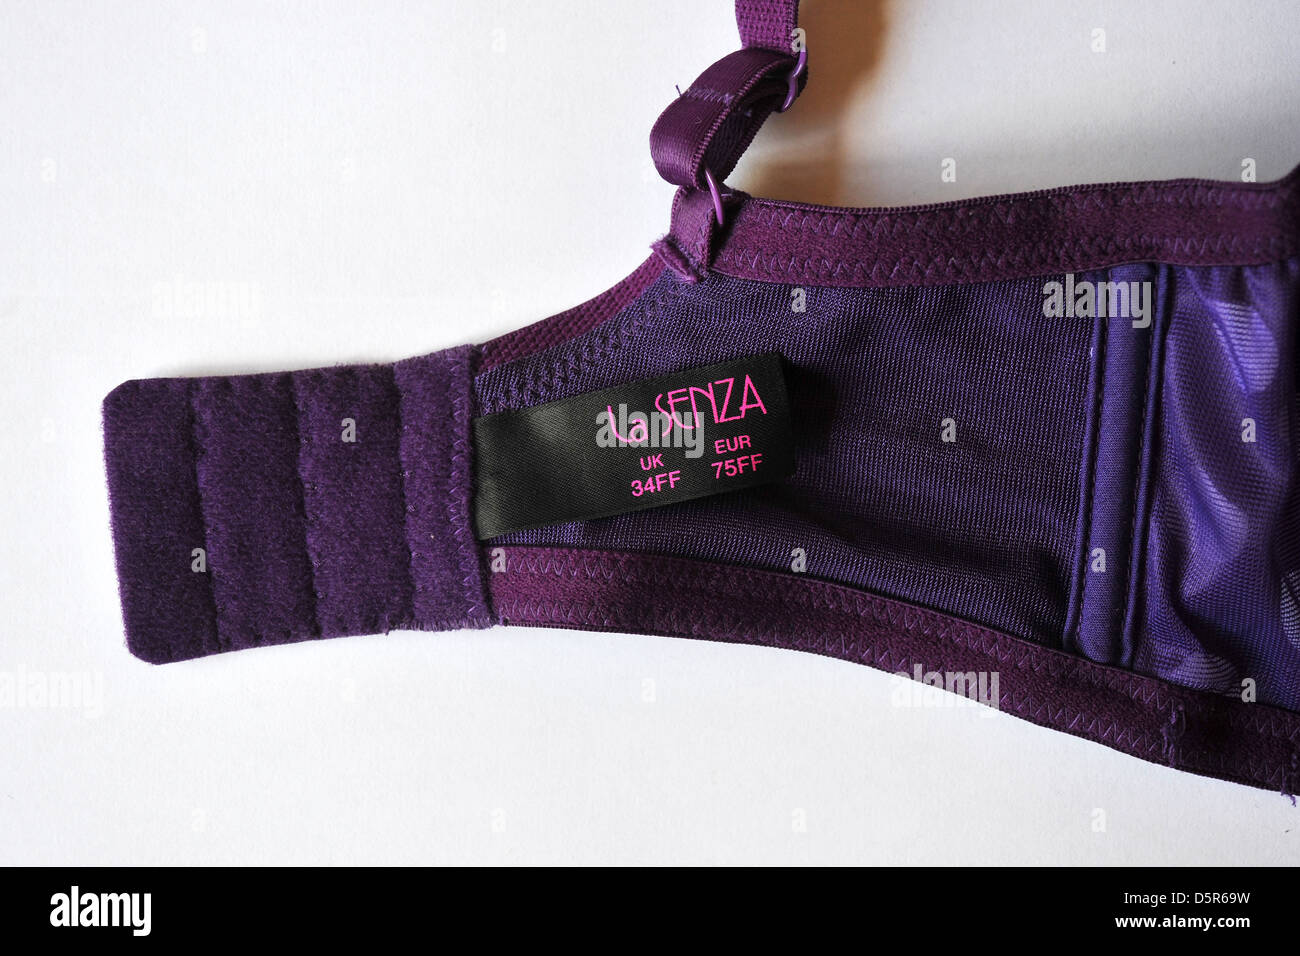 A large Bra (size 34FF/75FF) photographed in a studio Stock Photo - Alamy